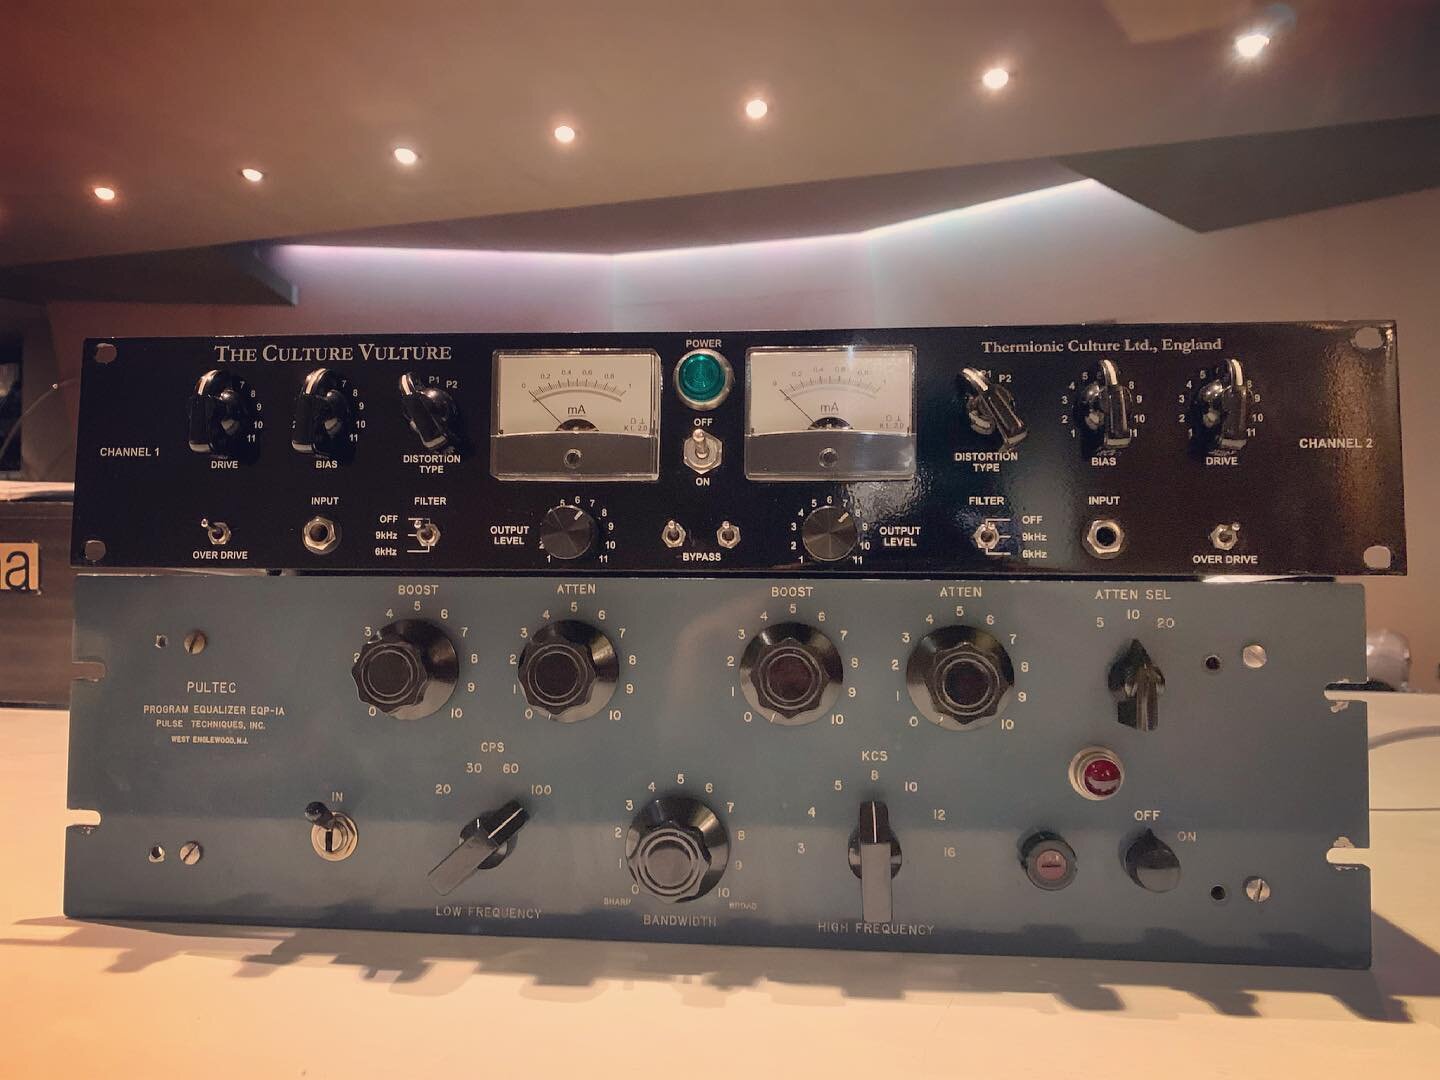 These two beauts are back in action after a thorough fix up. Analogue valve at its finest. Low thumping or high sheen EQ from the Pultec EQP-1A. And subtle harmonic enhancement or raucous distortion from the Thermionic Culture Vulture 😎
.
.
#angelic